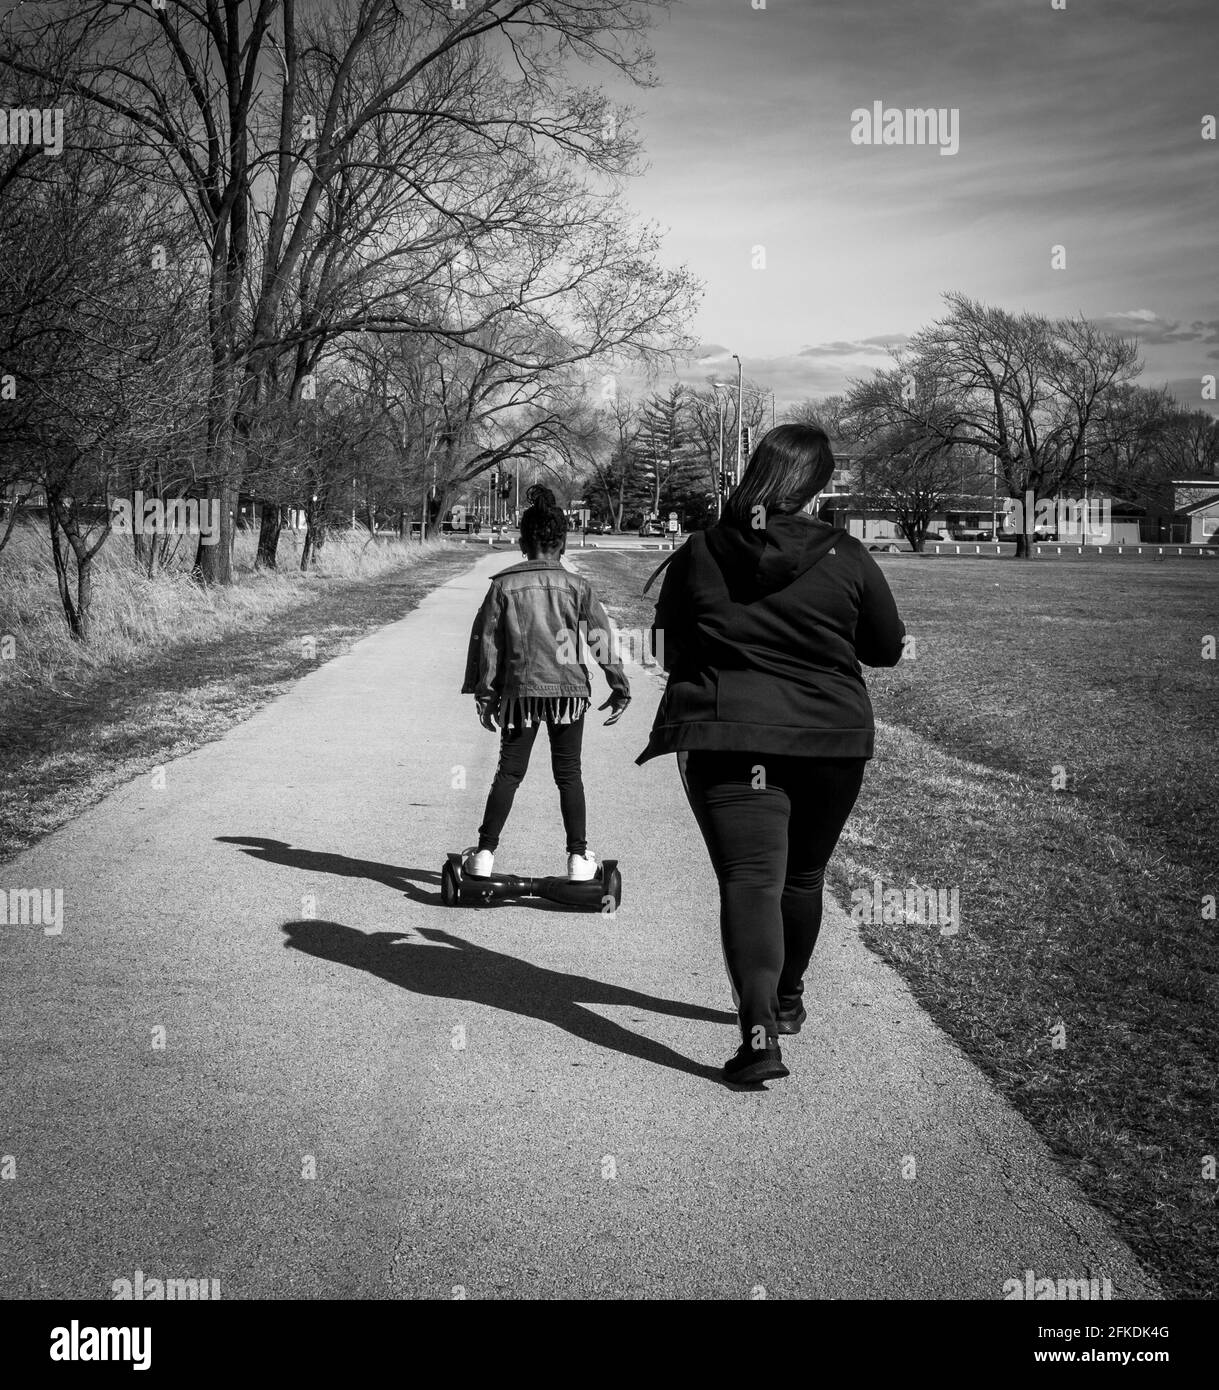 RIVERDAE, ILL. USA MARCH 22, 2021: AN AFRICAN AMERICAN WOMAN AND    YOUNG GIRL WALKING ON A TRAIL IN THE PARK, THE GIRL IS ON A HOVER BOARD Stock Photo